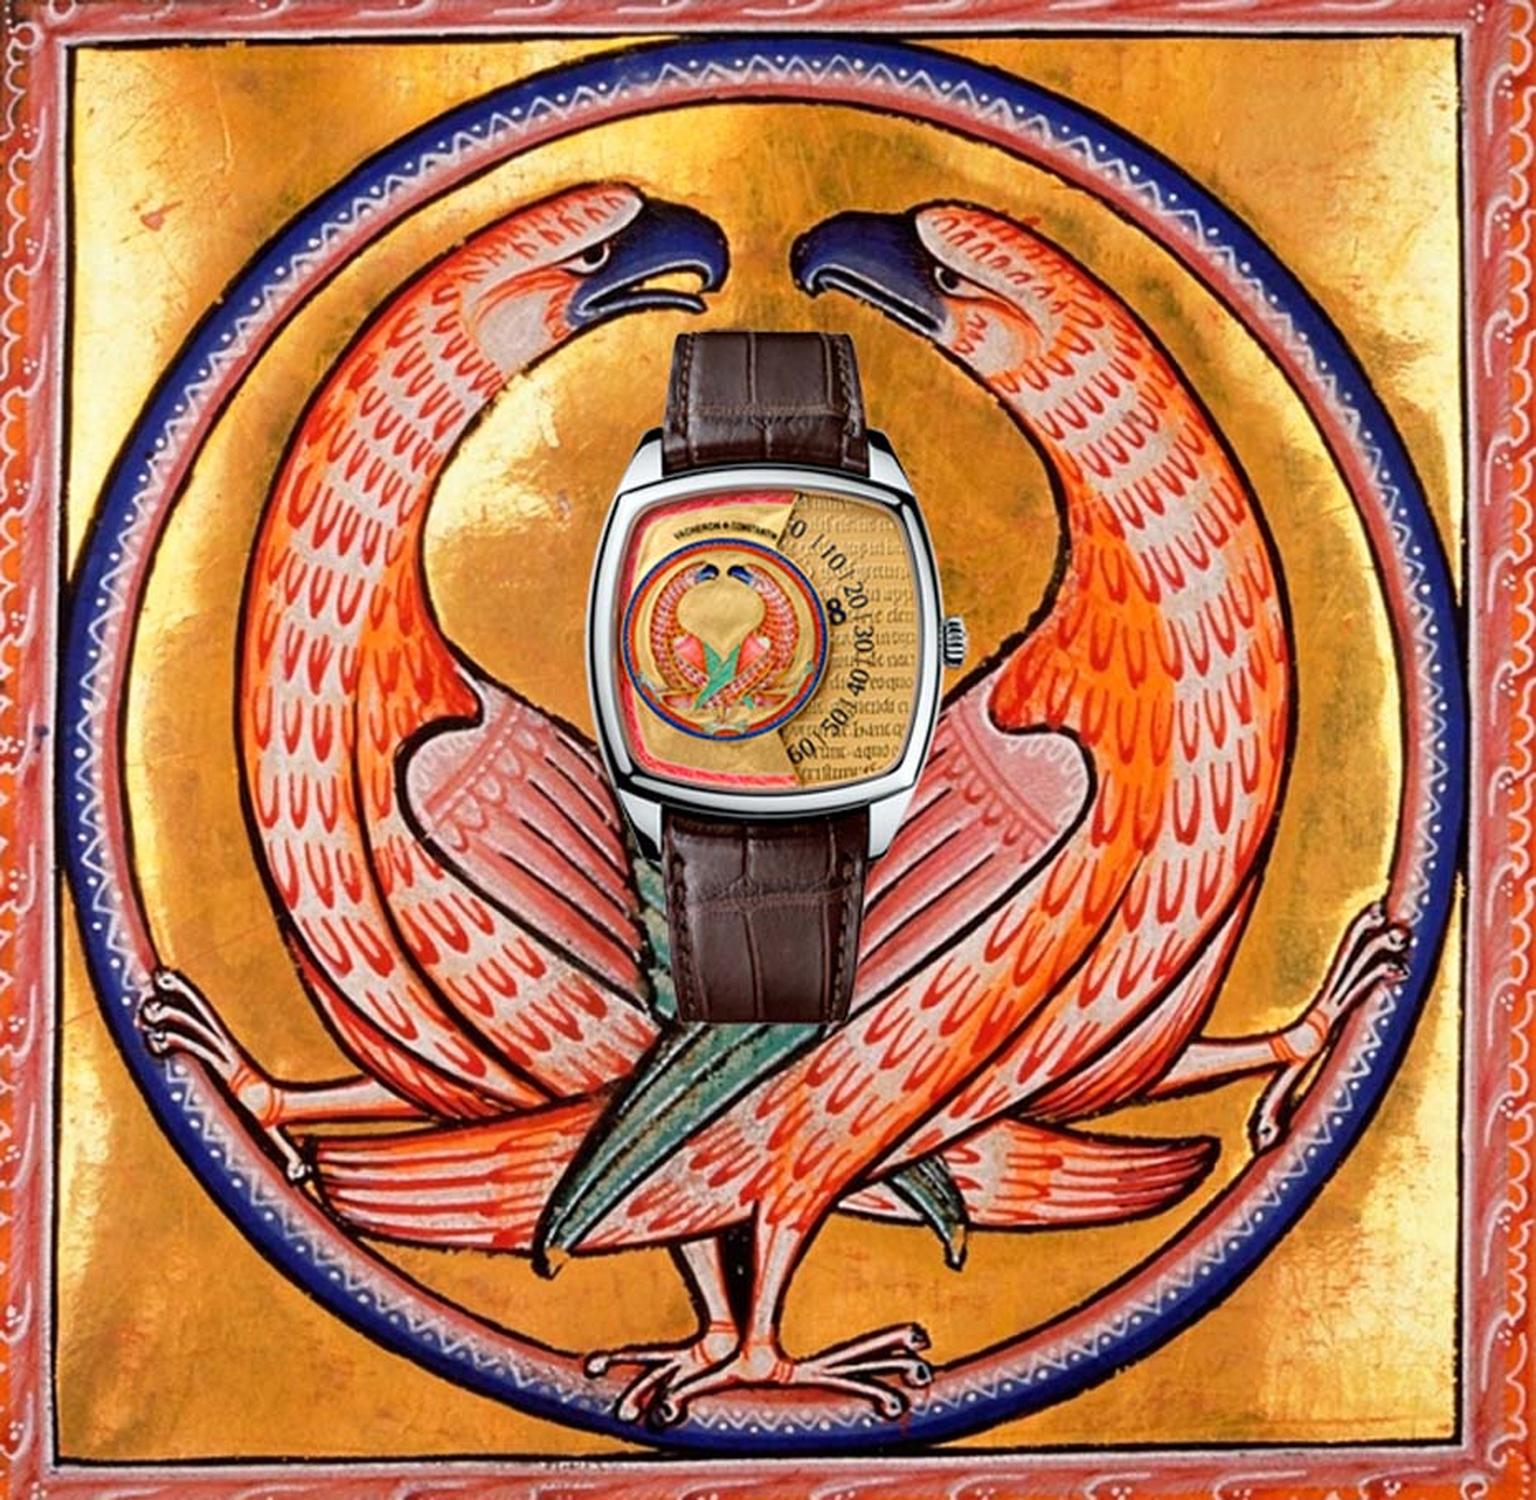 The original beasts of the 12th century Aberdeen Bestiary were designed to impart symbolic moral messages to a culture that relied almost entirely on visual metaphors. This Vacheron Constantin Vultures watch features two birds creating a circle to symboli